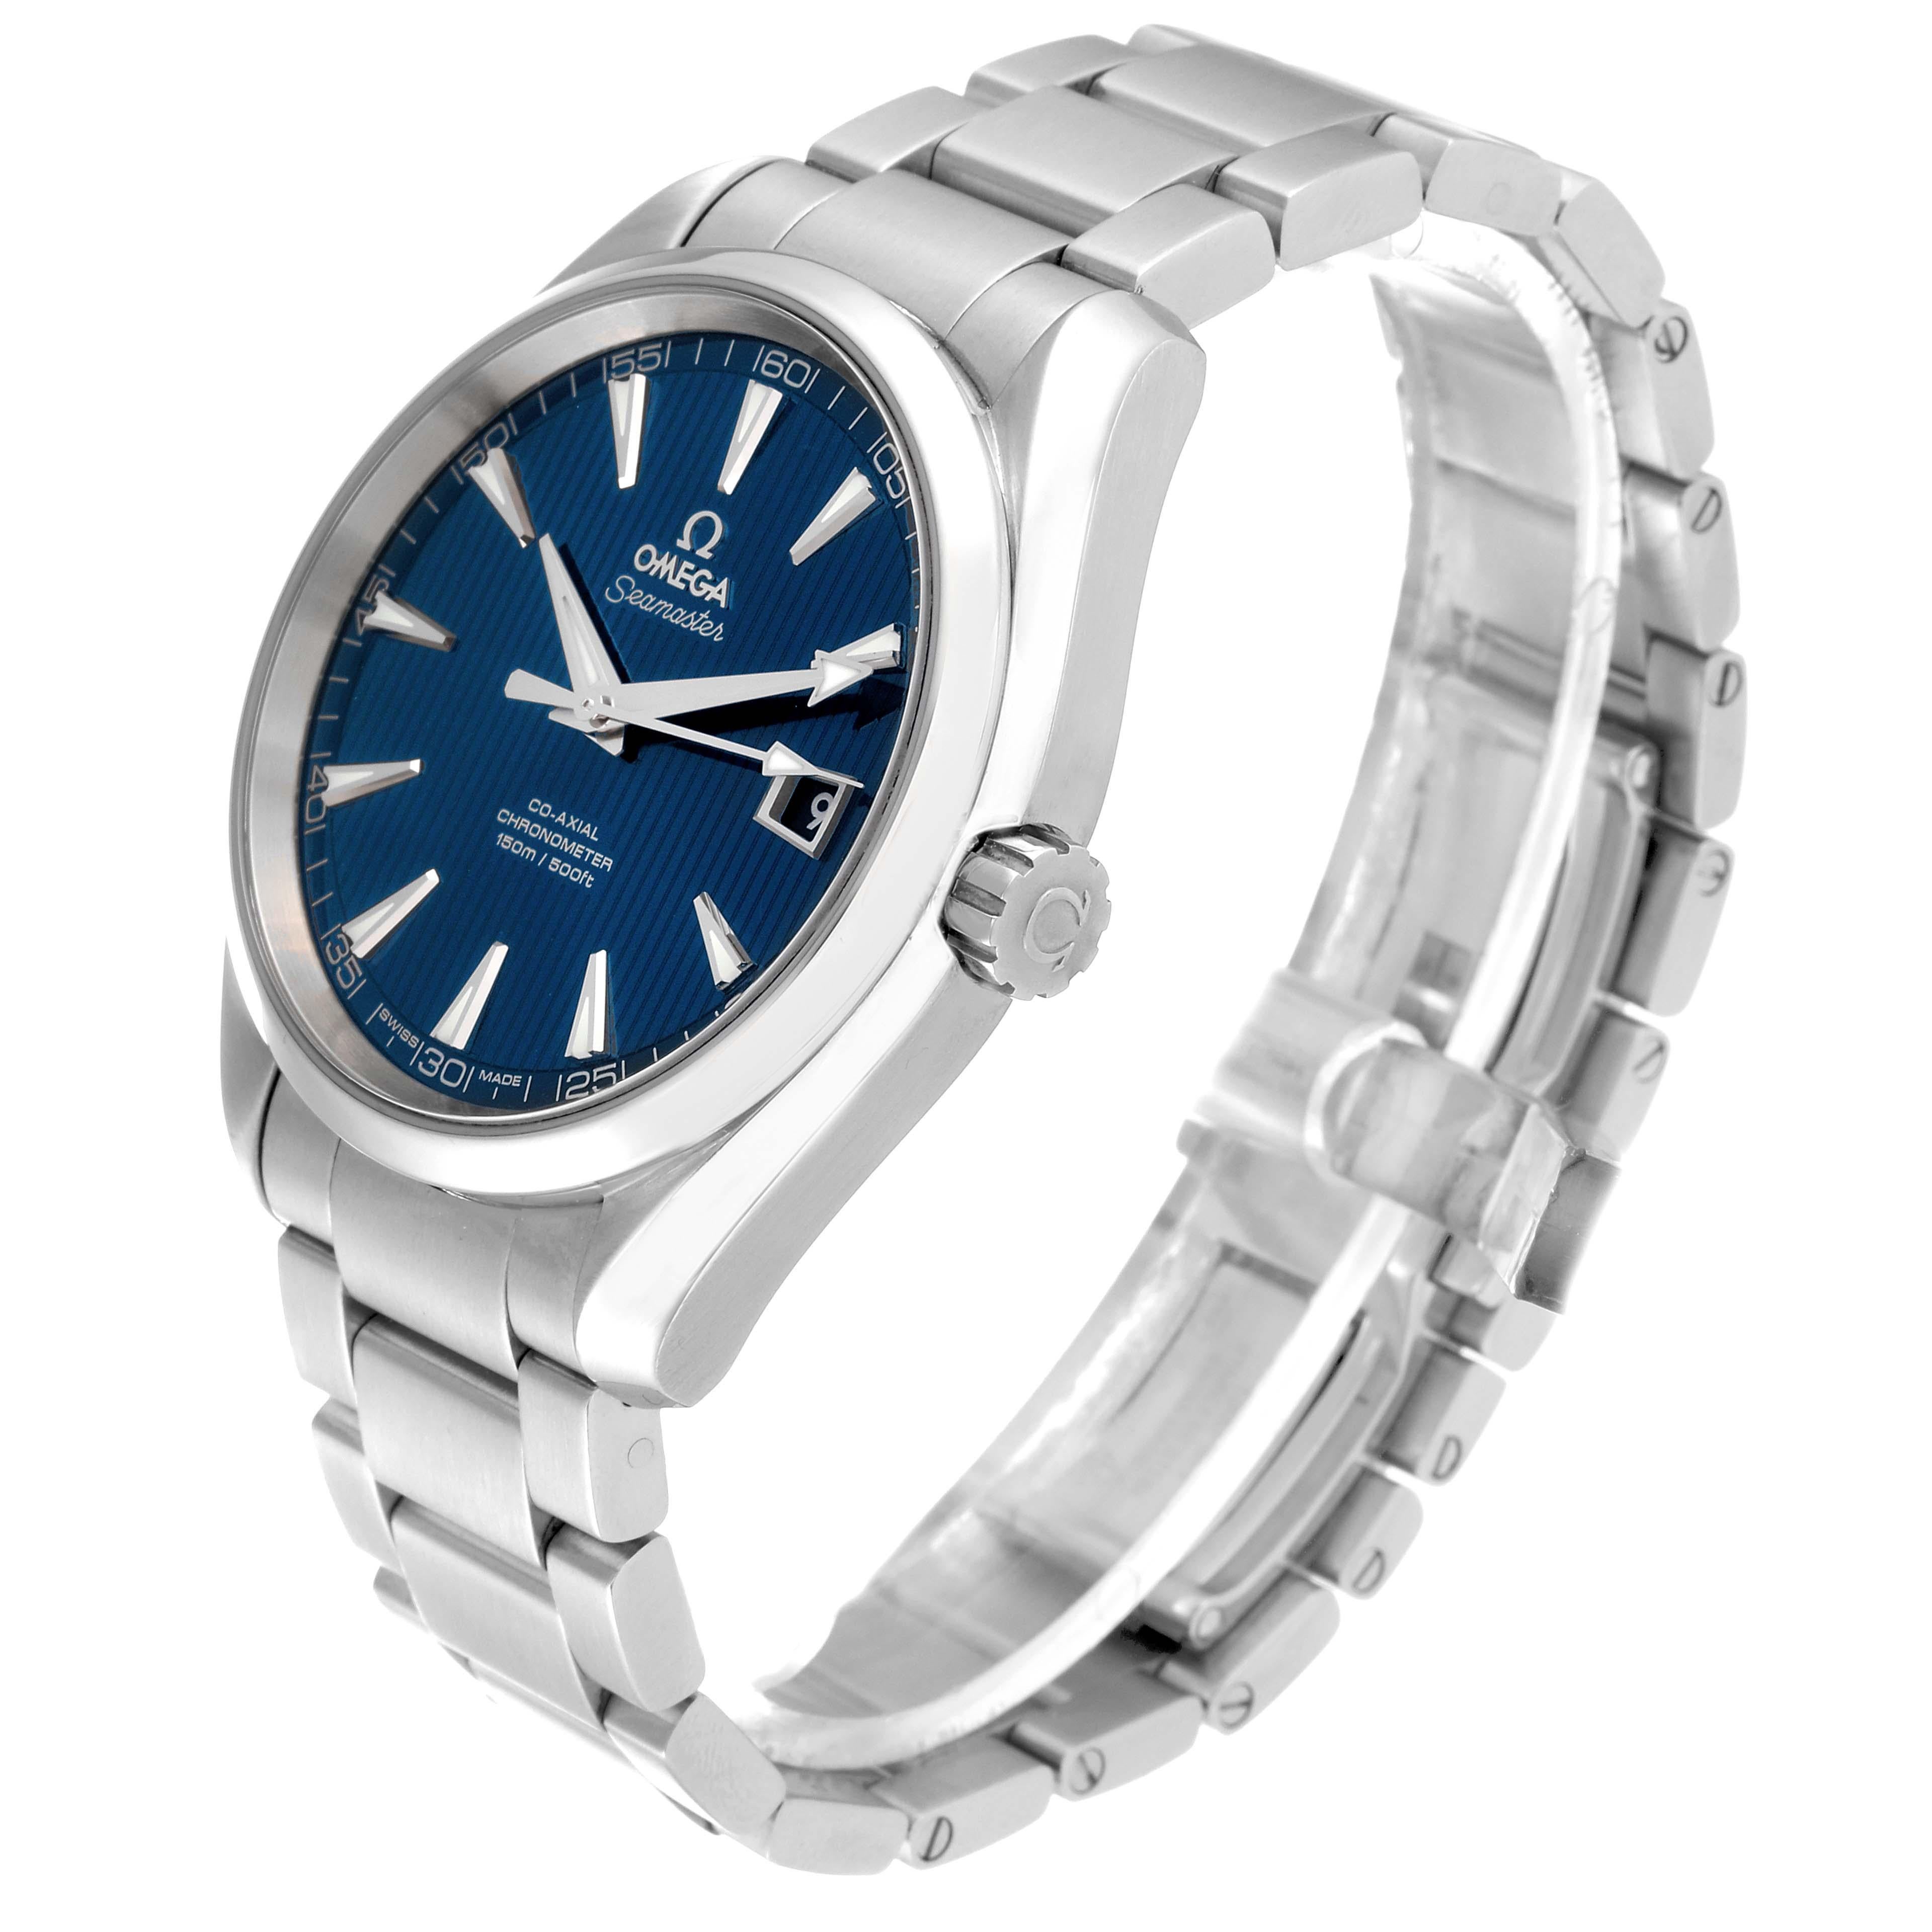 Omega Seamaster Aqua Terra Mens Steel Watch 231.10.42.21.03.001. Automatic self-winding movement. Stainless steel round case 41.5 mm in diameter. Exhibition transparent sapphire crystal caseback. Stainless steel smooth bezel. Scratch resistant